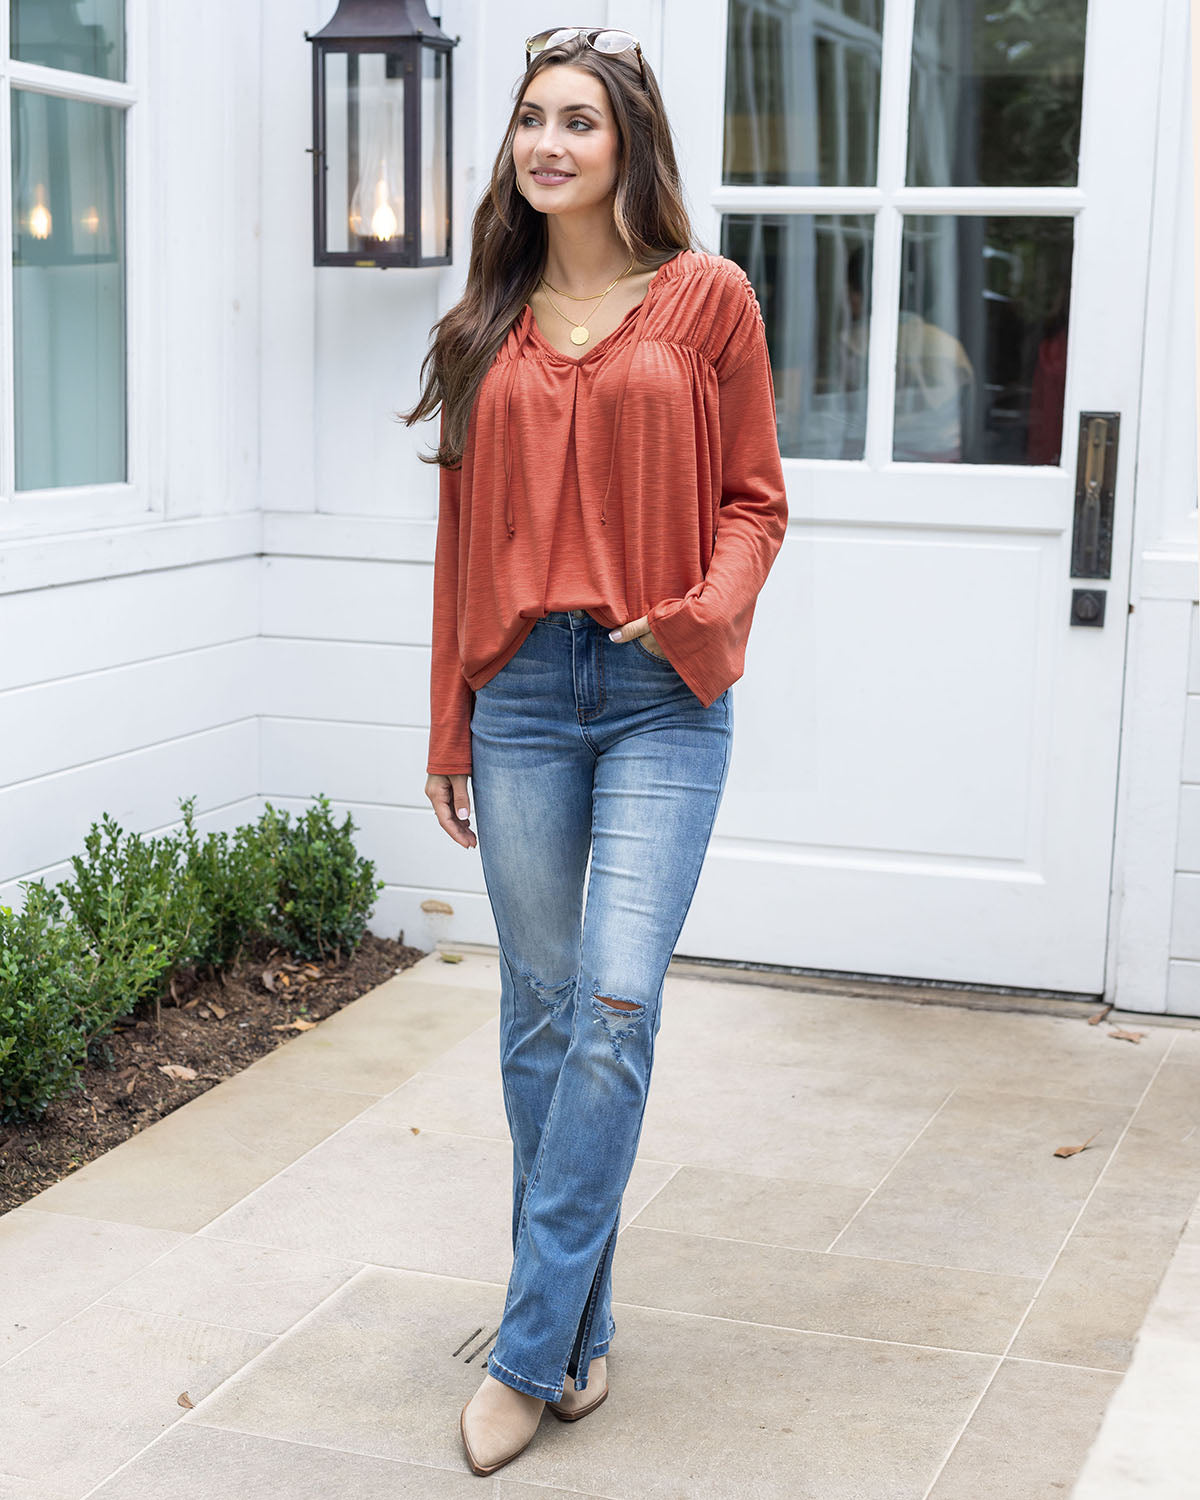 Flare Jeans with Off Shoulder Top Outfits (6 ideas & outfits